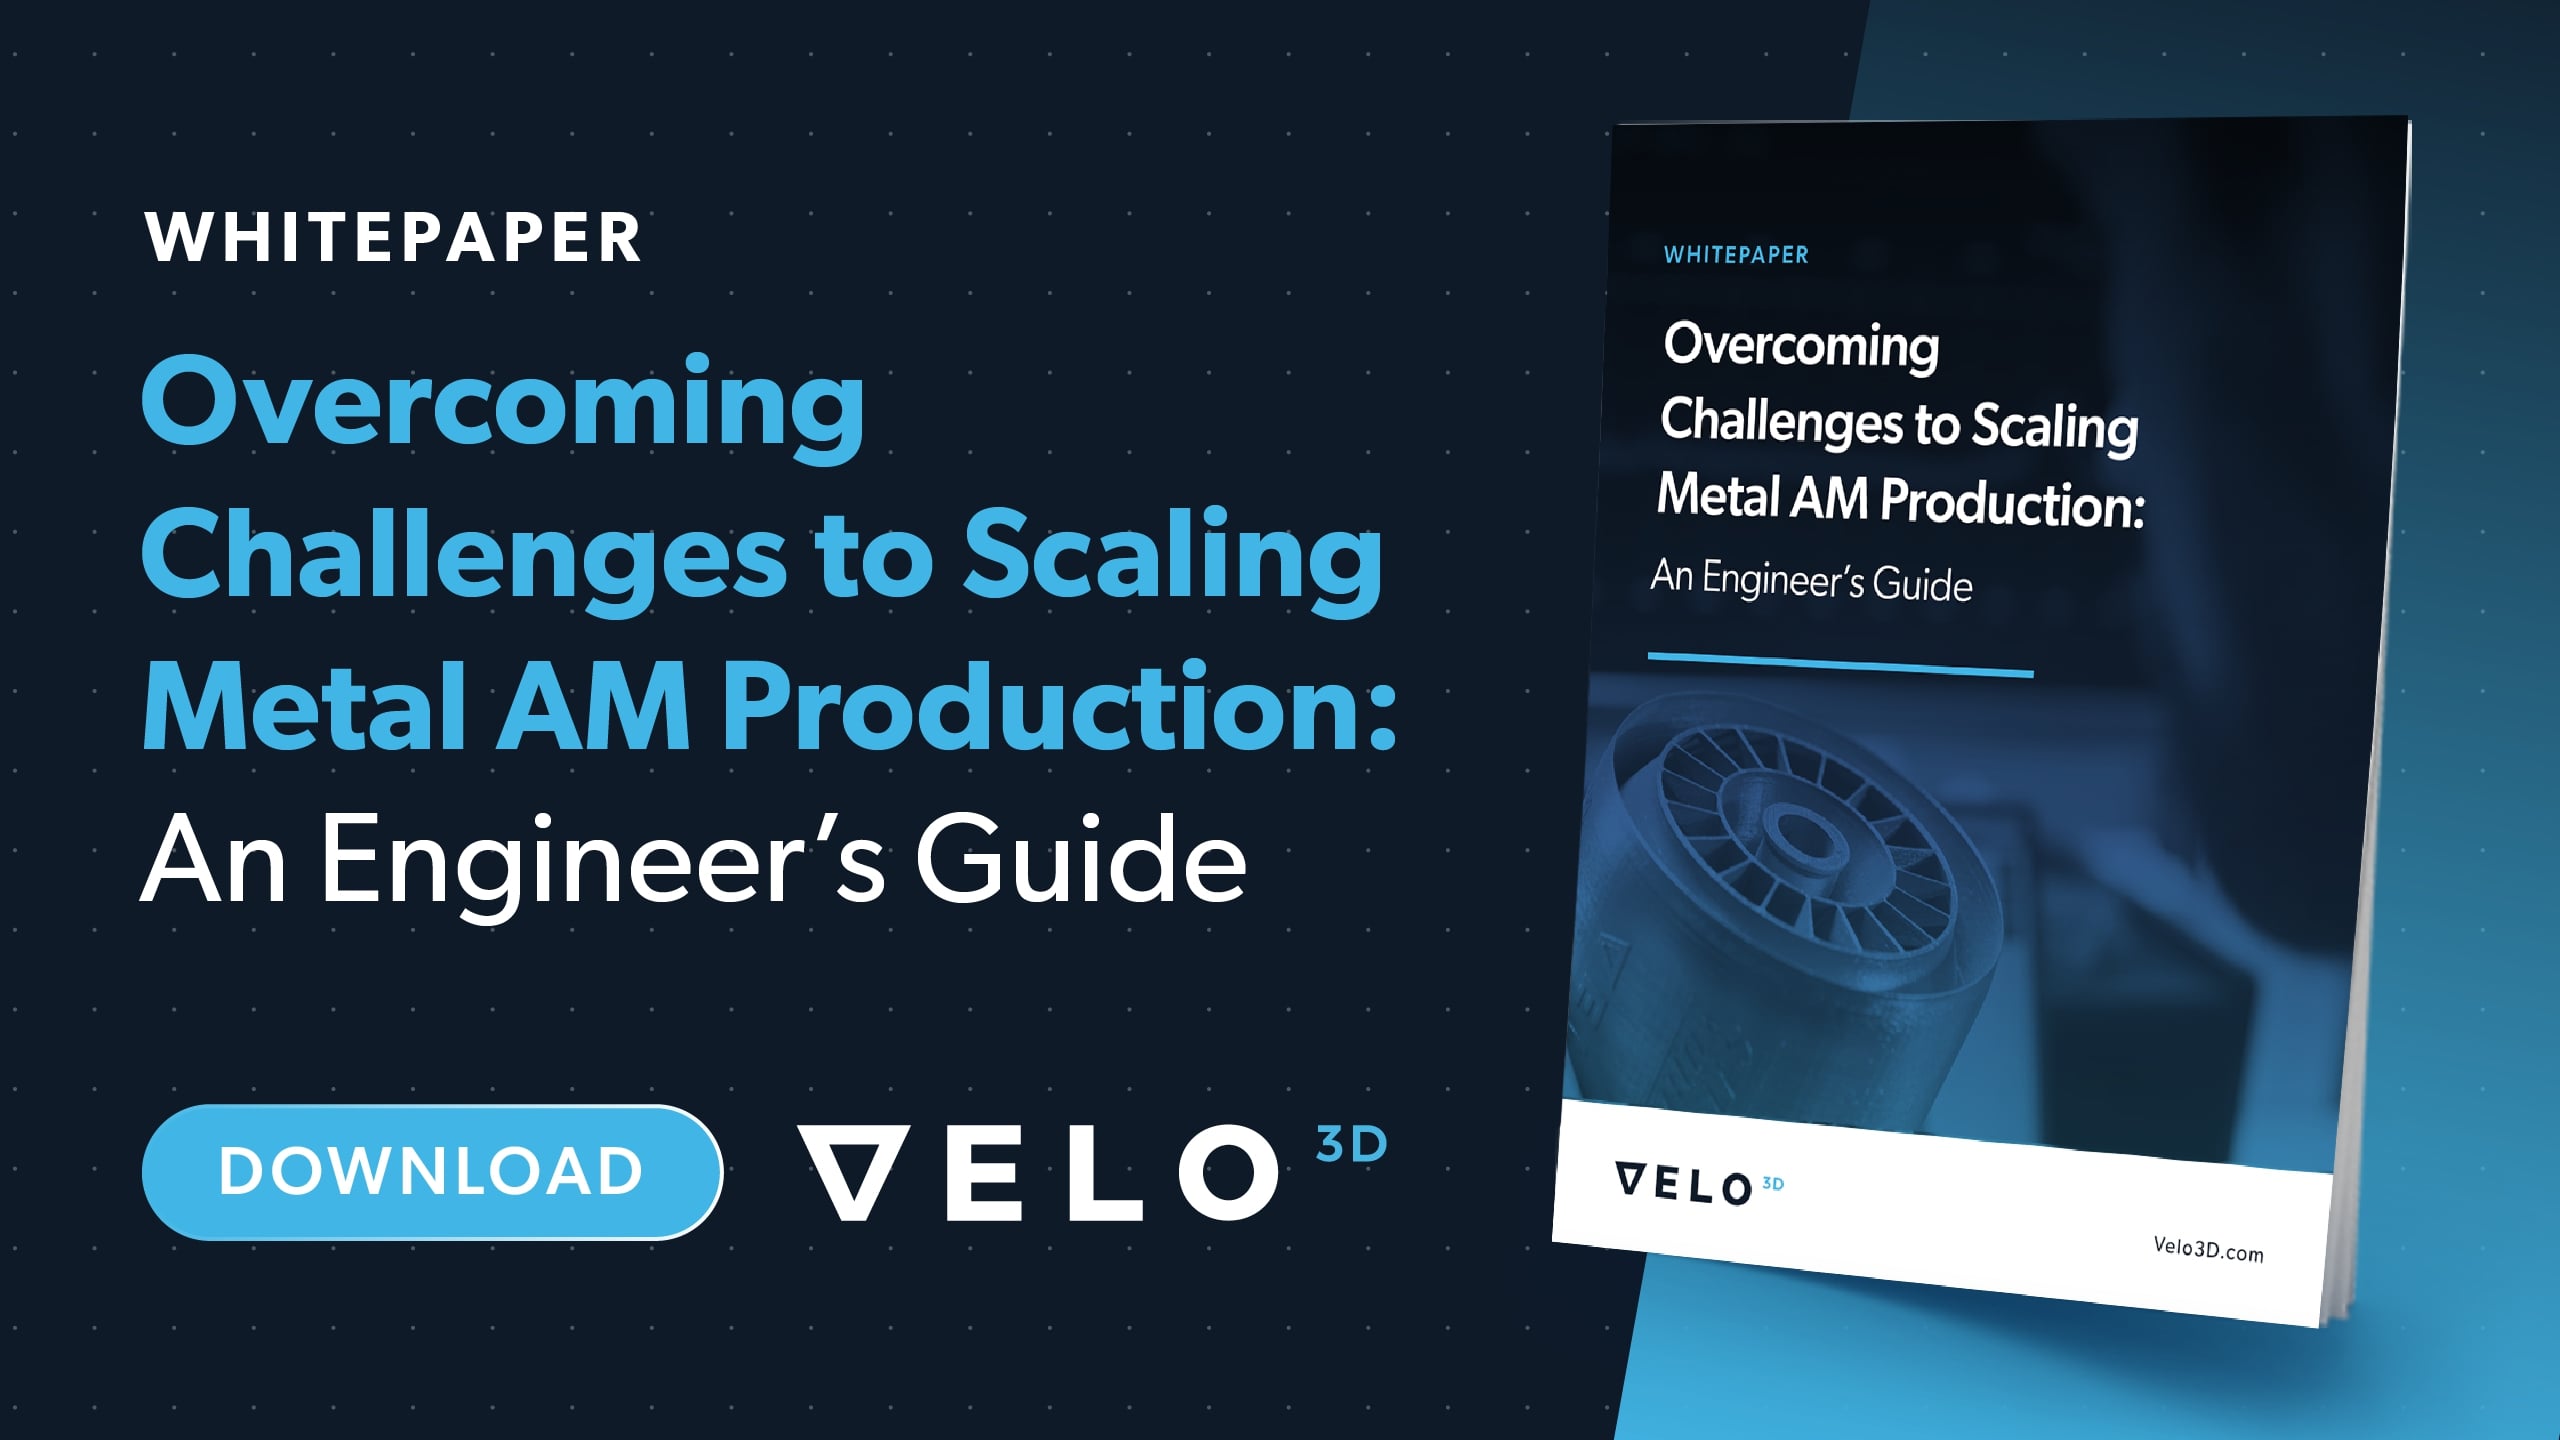 Overcoming Challenges to Scaling Metal AM Production: An Engineer’s Guide